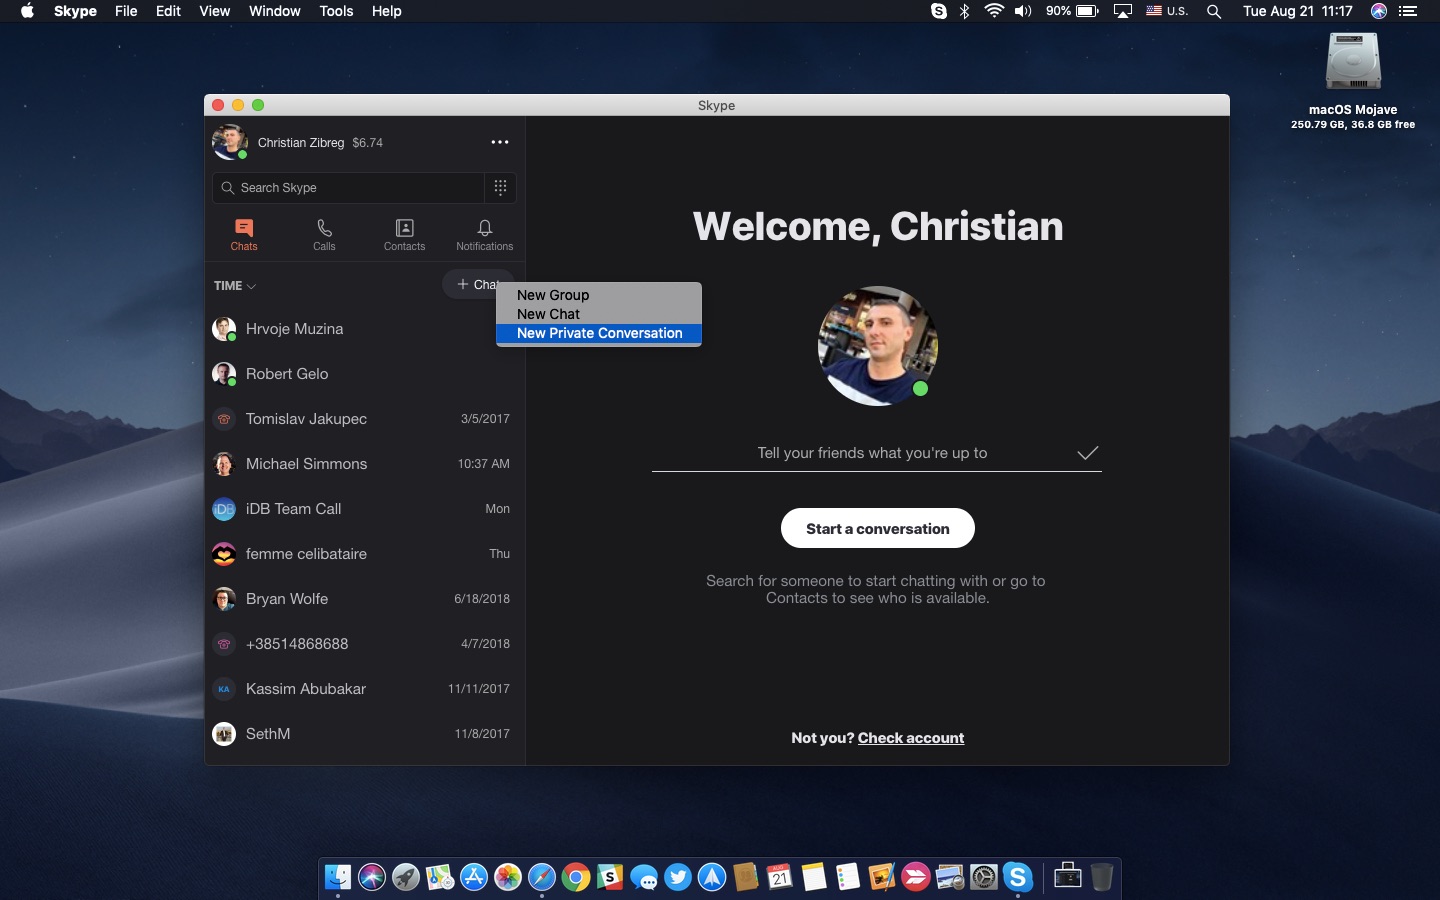 Download Conversations From Skype On Mac